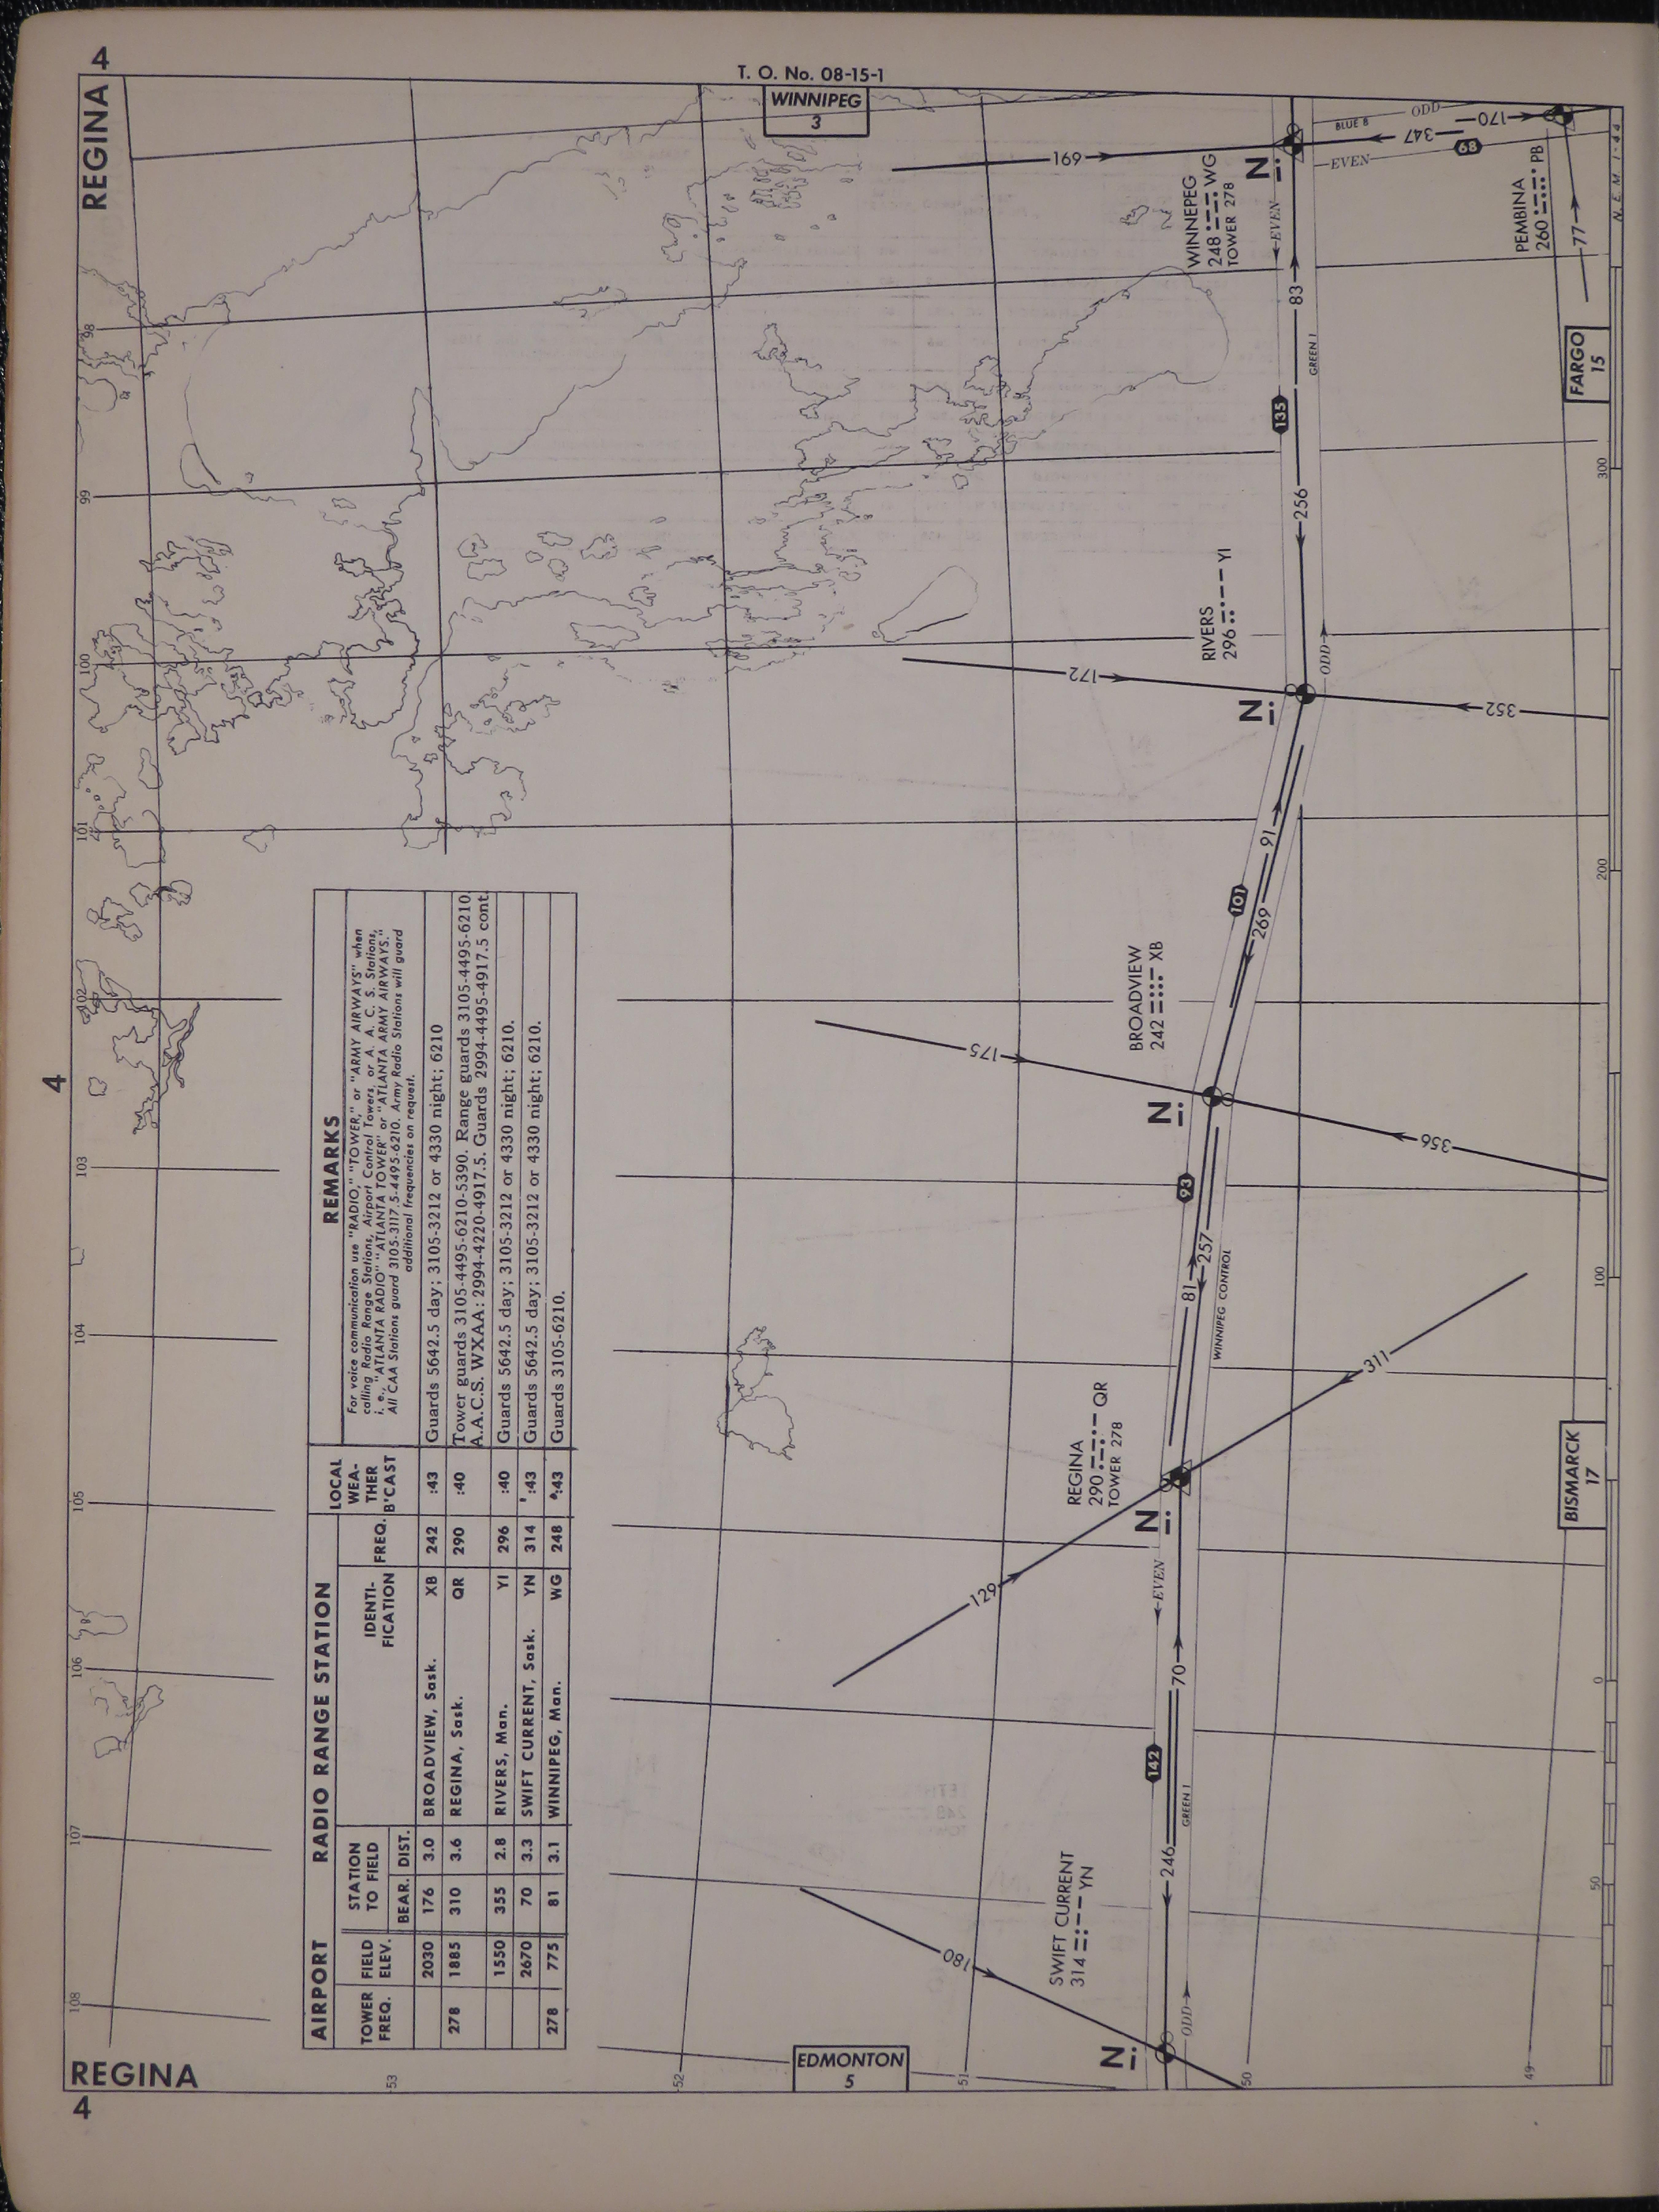 Sample page 8 from AirCorps Library document: Army Air Forces Radio Facility Charts